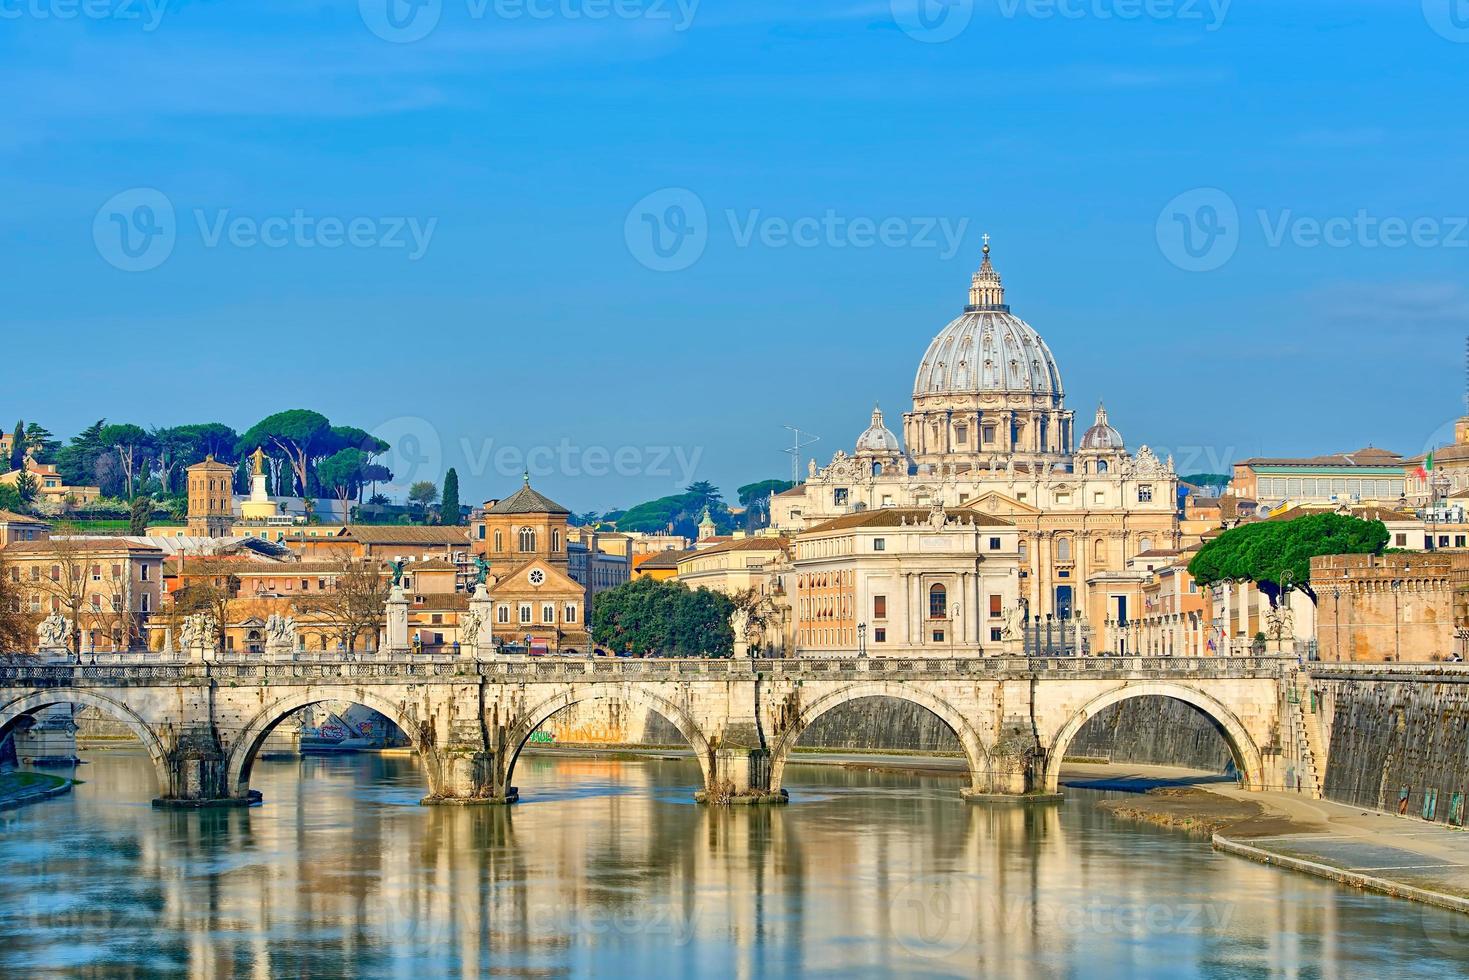 Bridge of Castel St. Angelo on the Tiber.Dome of St. Peter's basilica, Rome - Italy photo